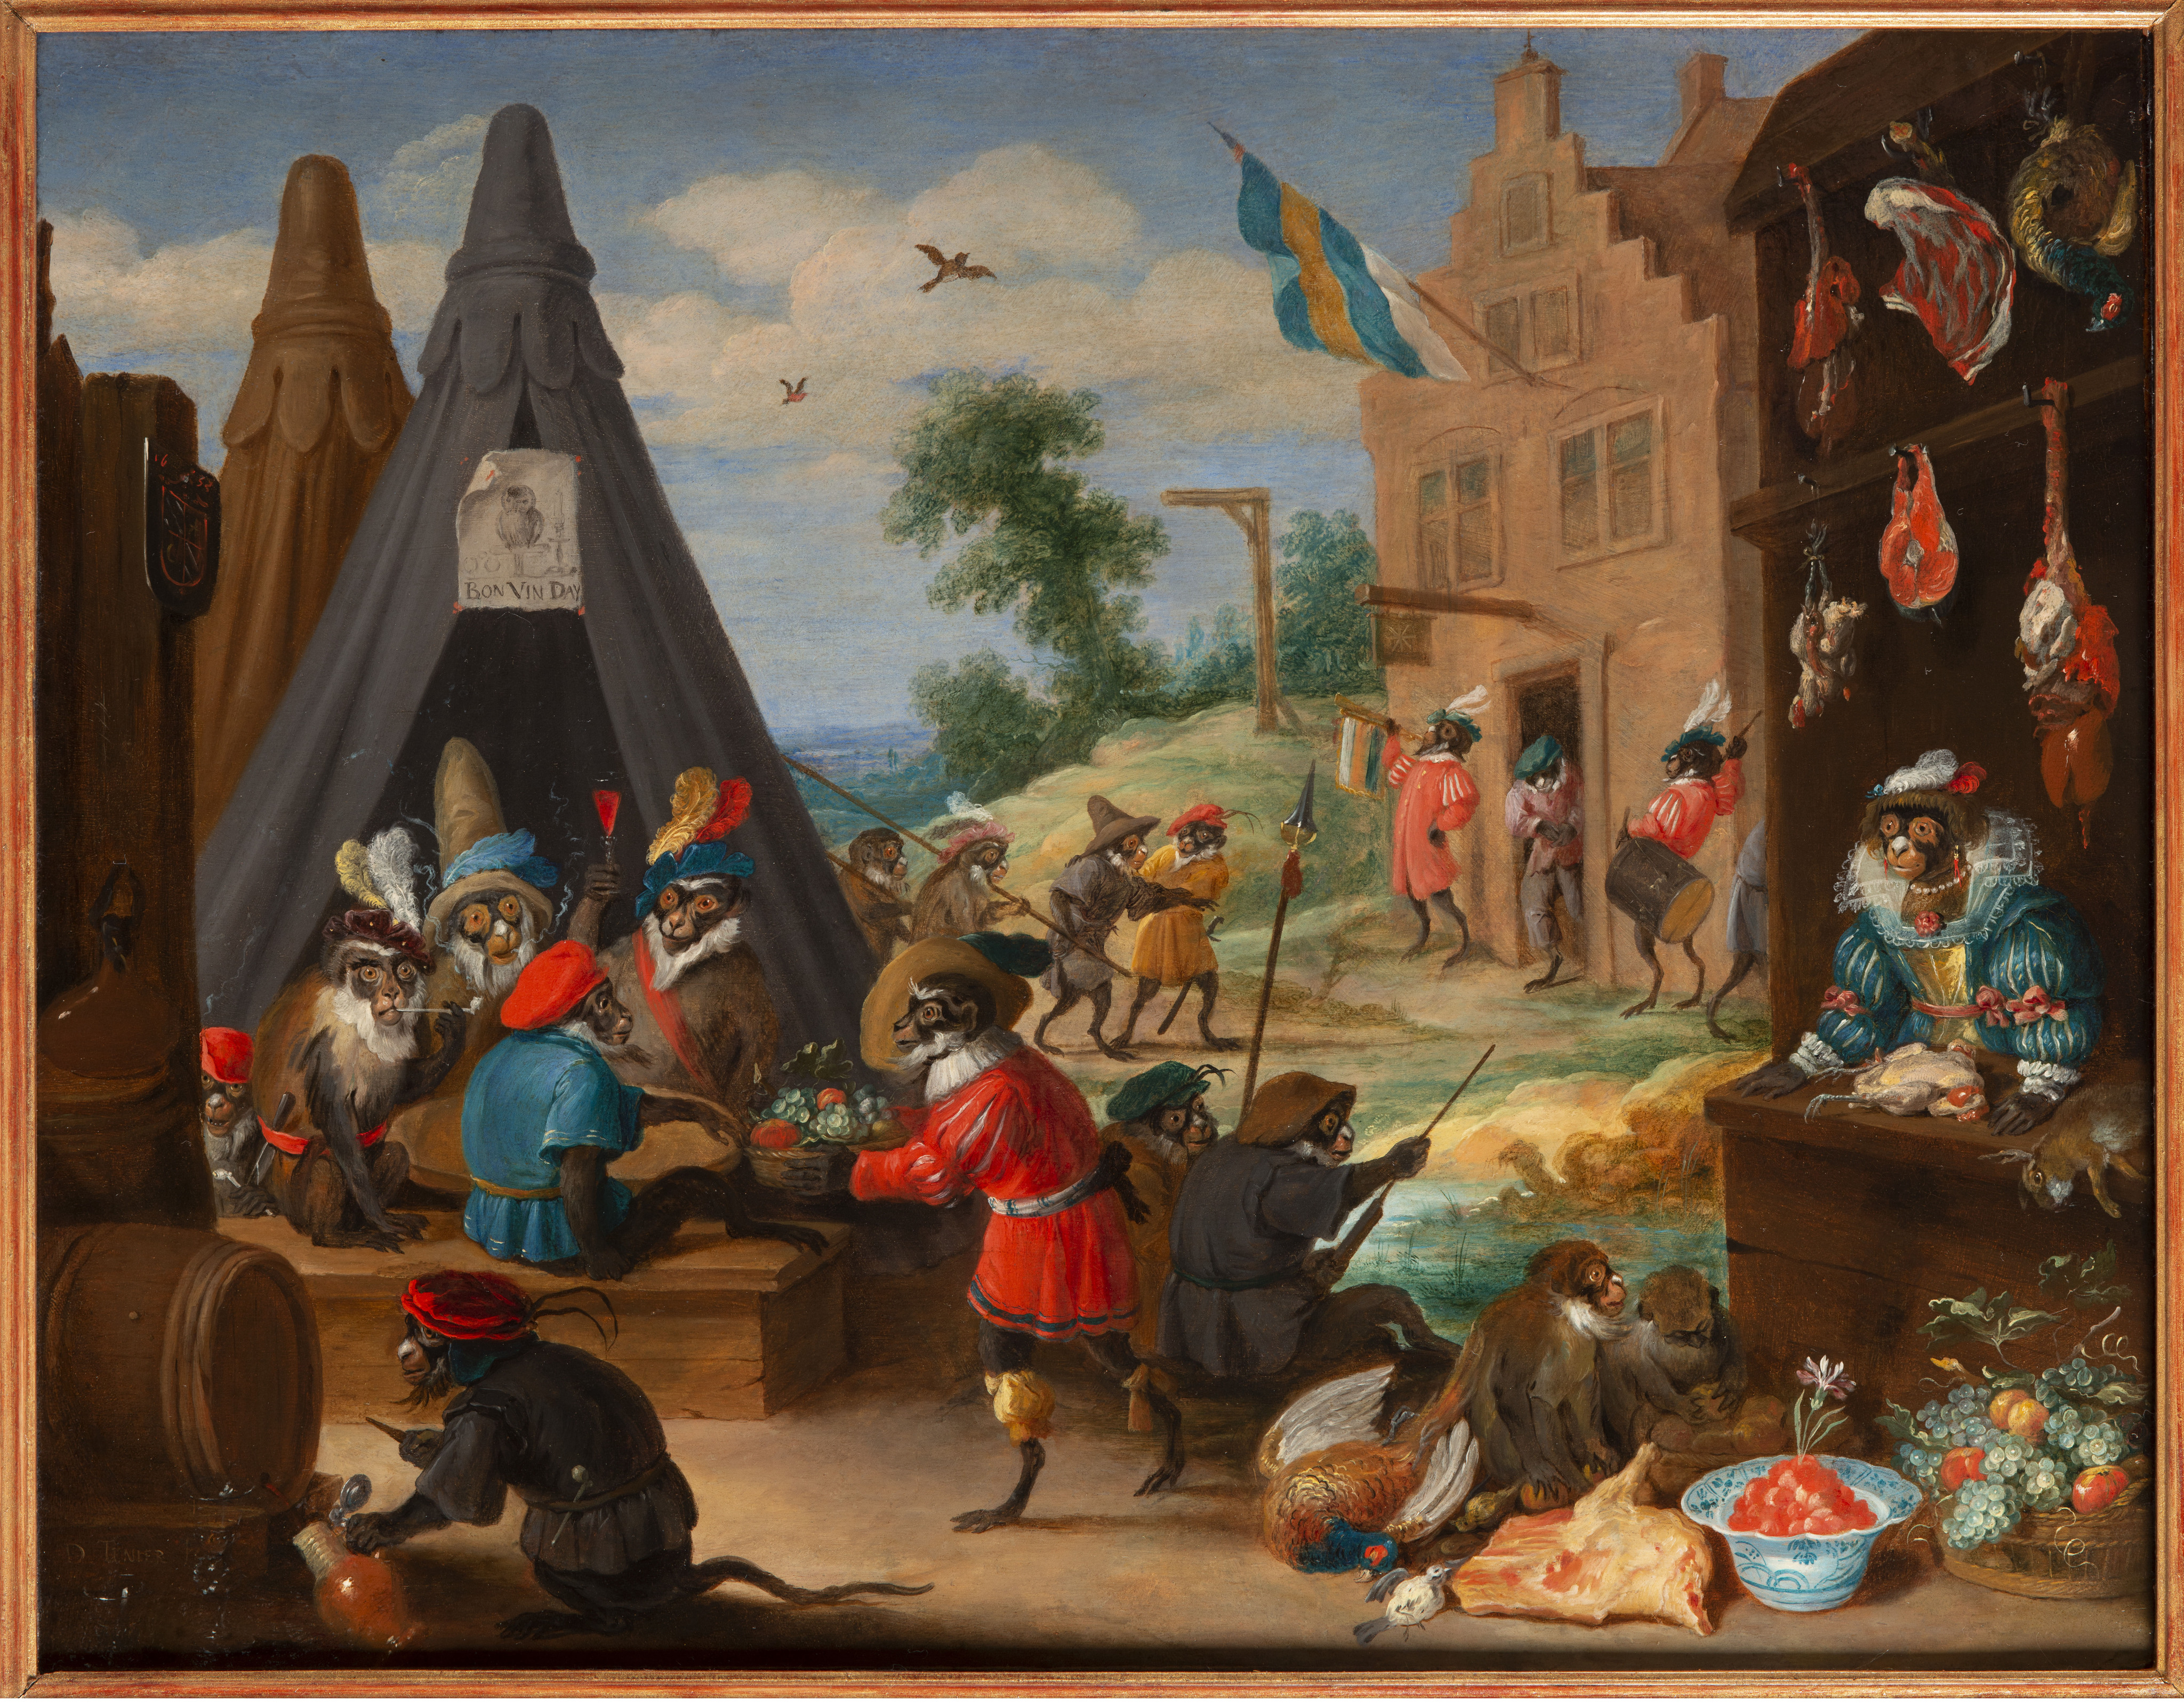 Saints, Sinners, Lovers, and Fools: 300 Years of Flemish Masterworks